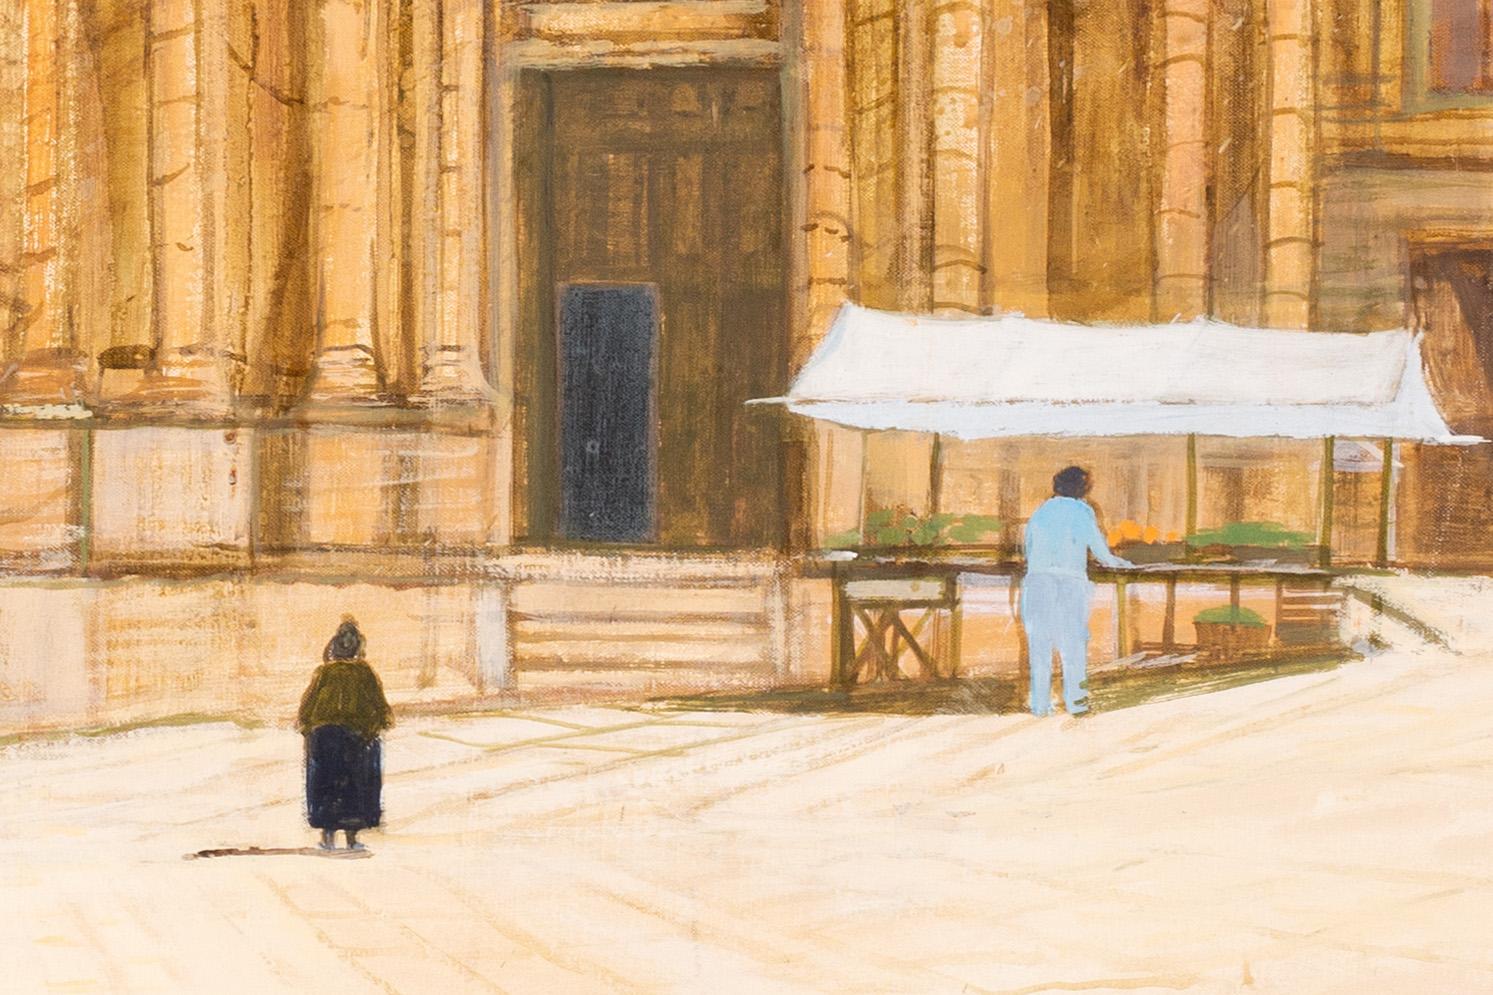 British 20th Century oil painting of a market stall at a Baroque church, Italy - Post-Impressionist Painting by Richard Beer